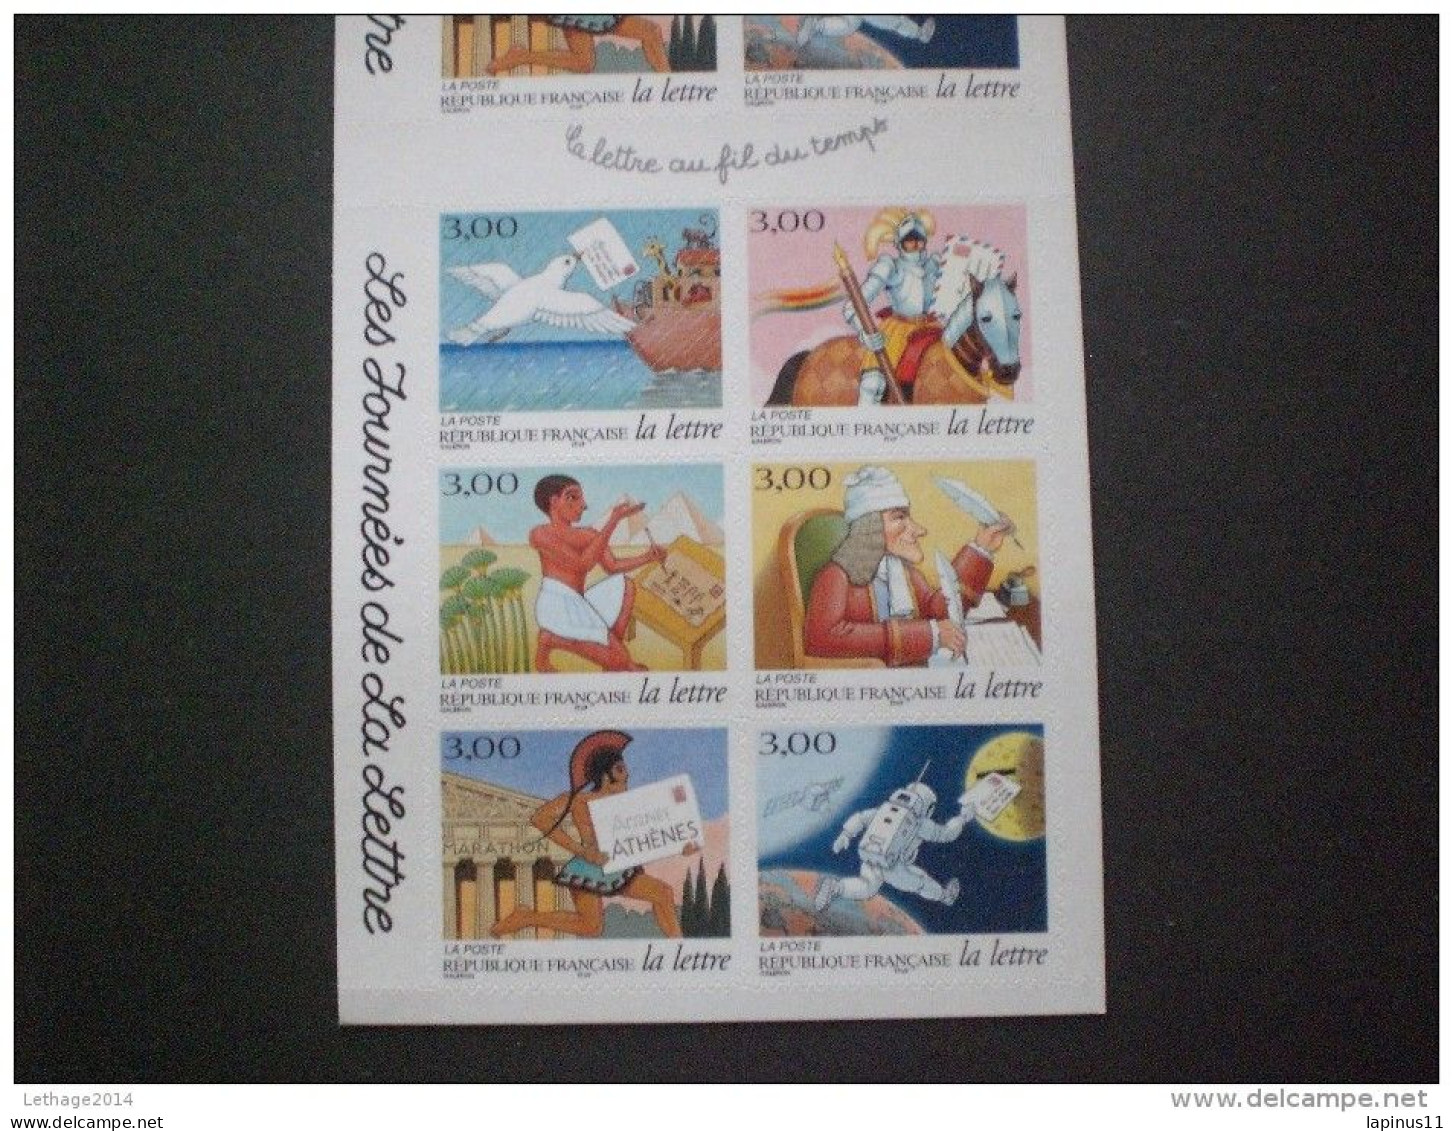 STAMPS France FRANCE CARNETS 1998 Postal Communication Through Times - Self-adhesive - Booklets